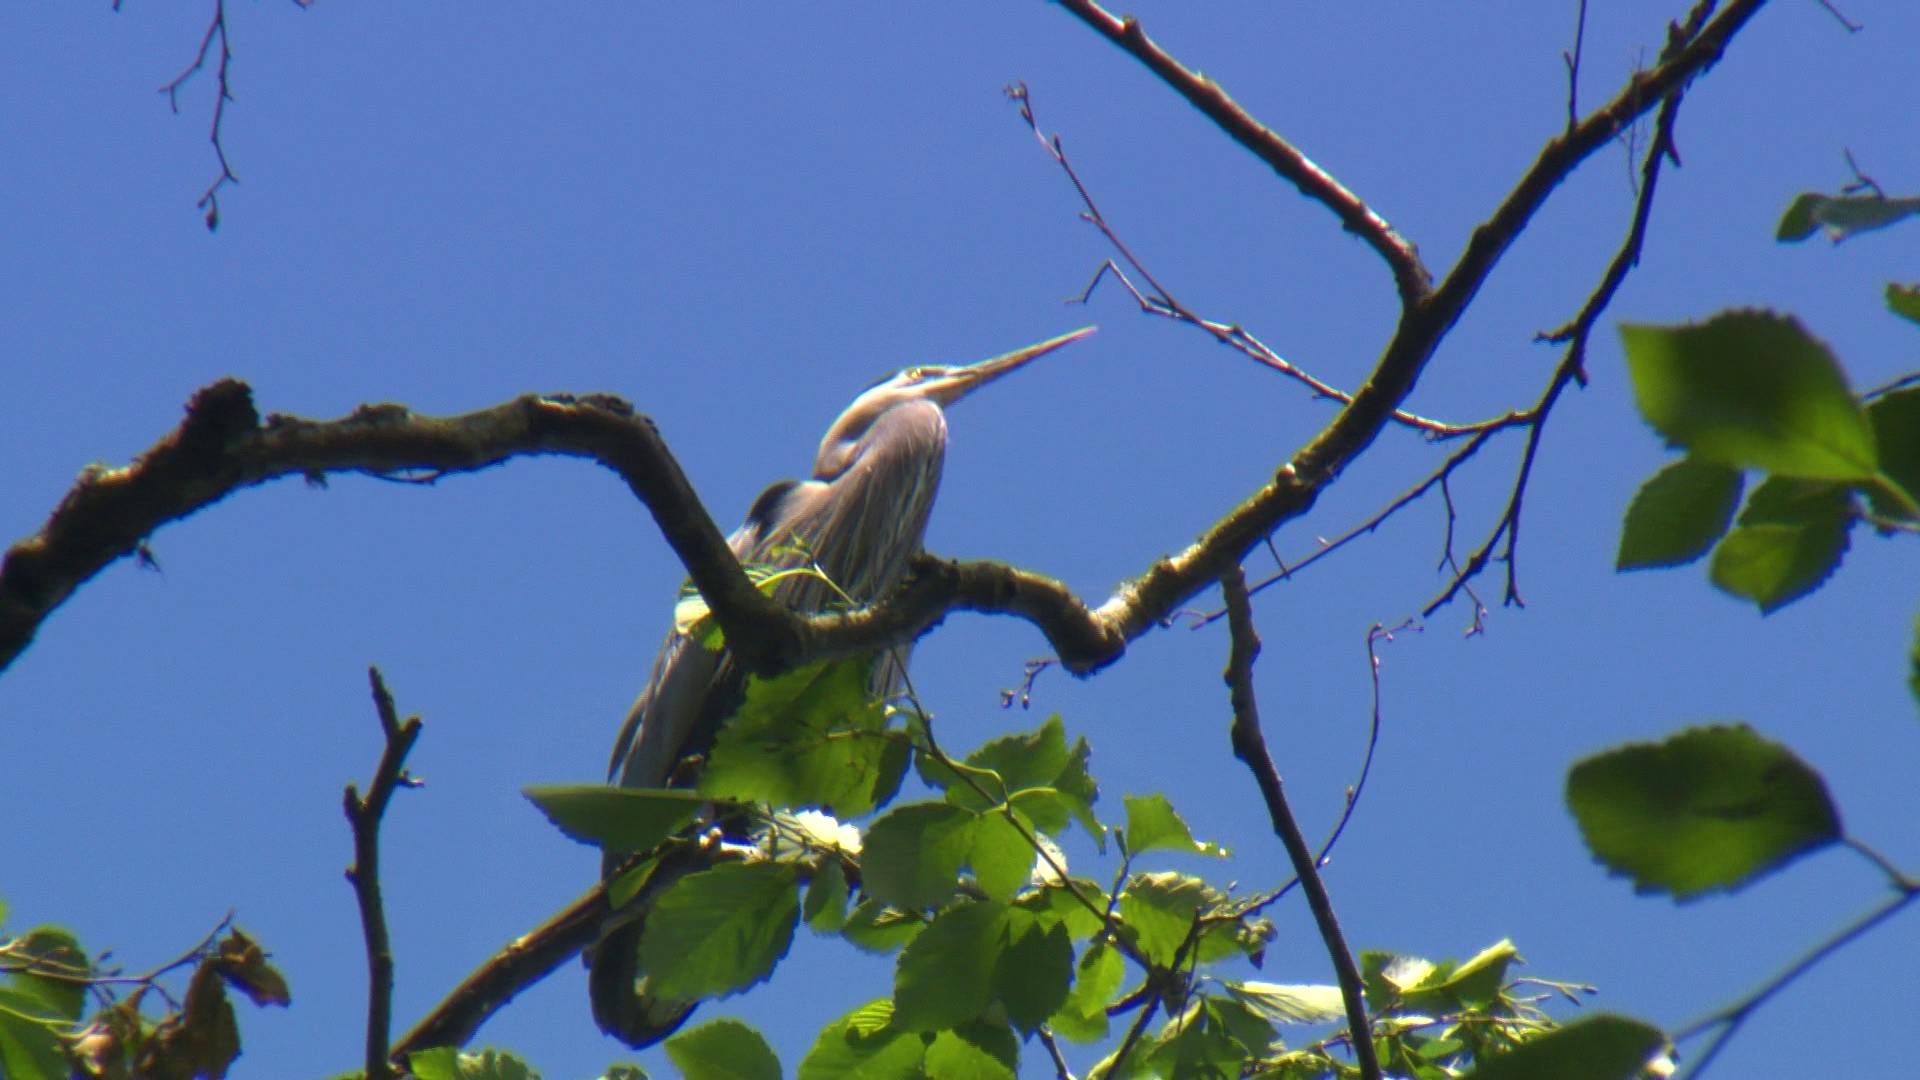 It's the time of year where Blue Herons can be spotted nesting around the city, like the ones we found in Commodore Park. #k5evening